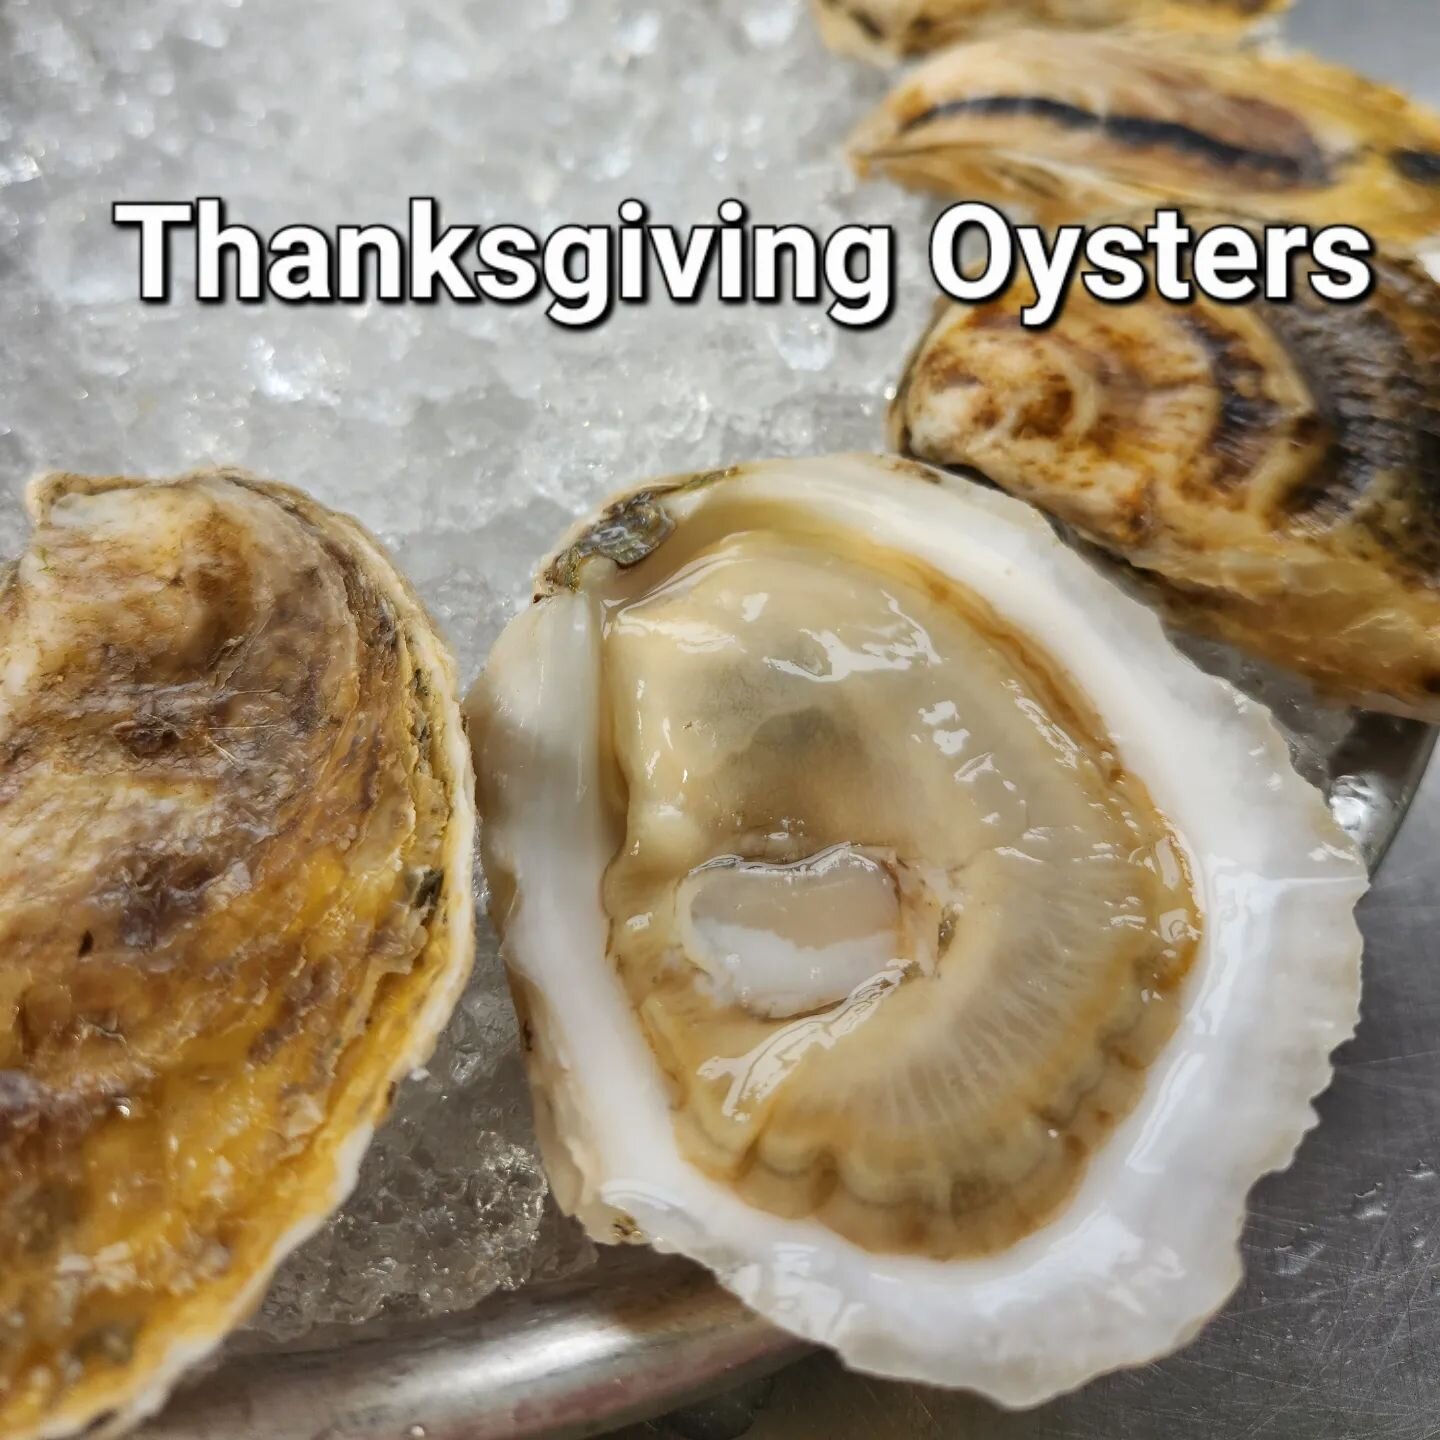 PRE-ORDER YOUR THANKSGIVING OYSTERS TODAY!

OYSTERS BY THE DOZEN
SHUCKED OYSTER MEATS
SAUCES

PICK UP IN DOVER NH OR PORTLAND ME

LINK IN BIO